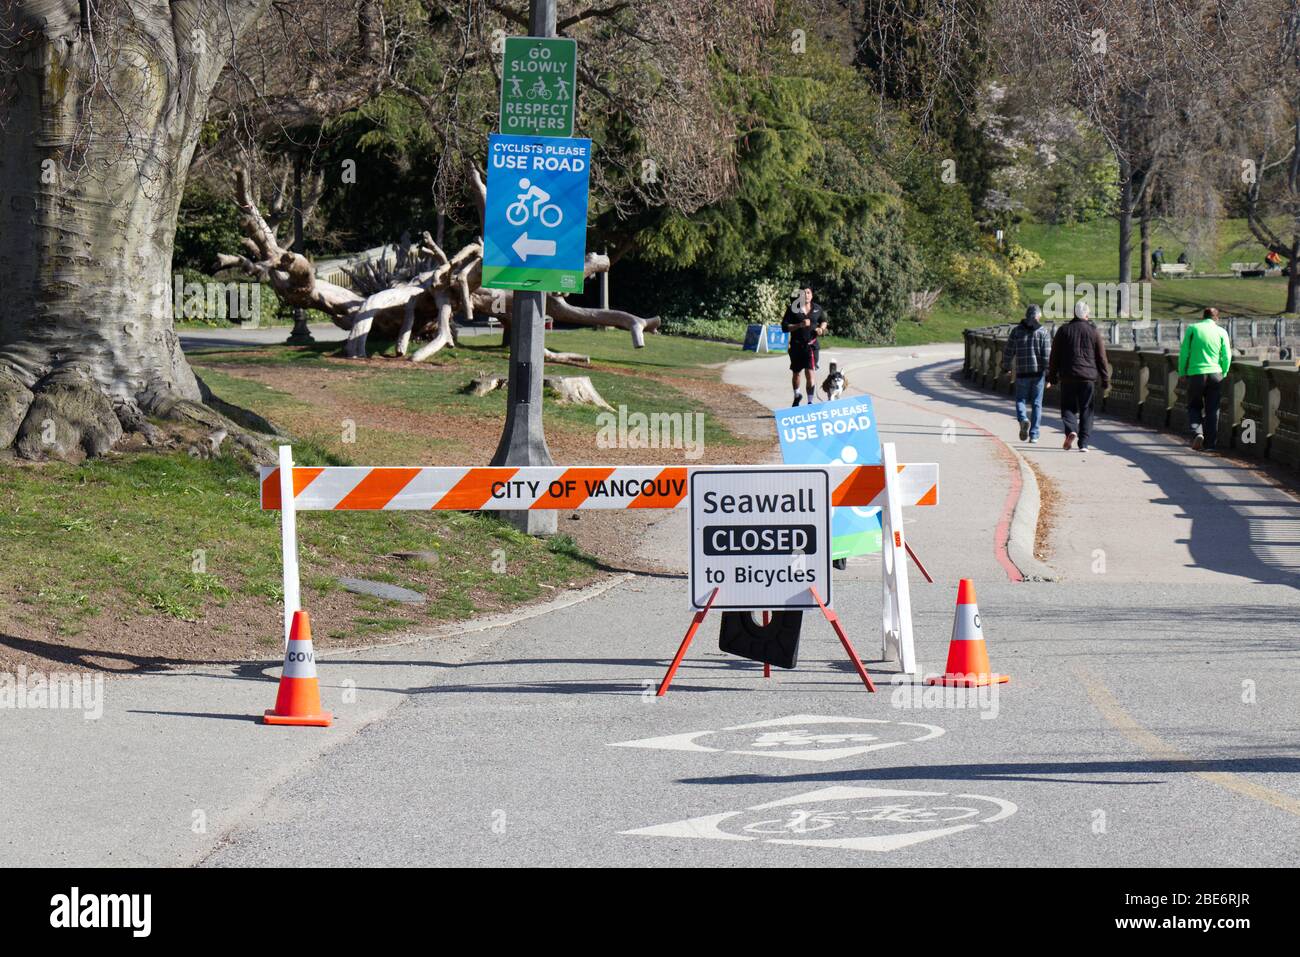 Vancouver, Canada - April 11, 2020: View of sign 'Seawall Closed to Bicycles' due to COVID-19(coronavirus) Stock Photo